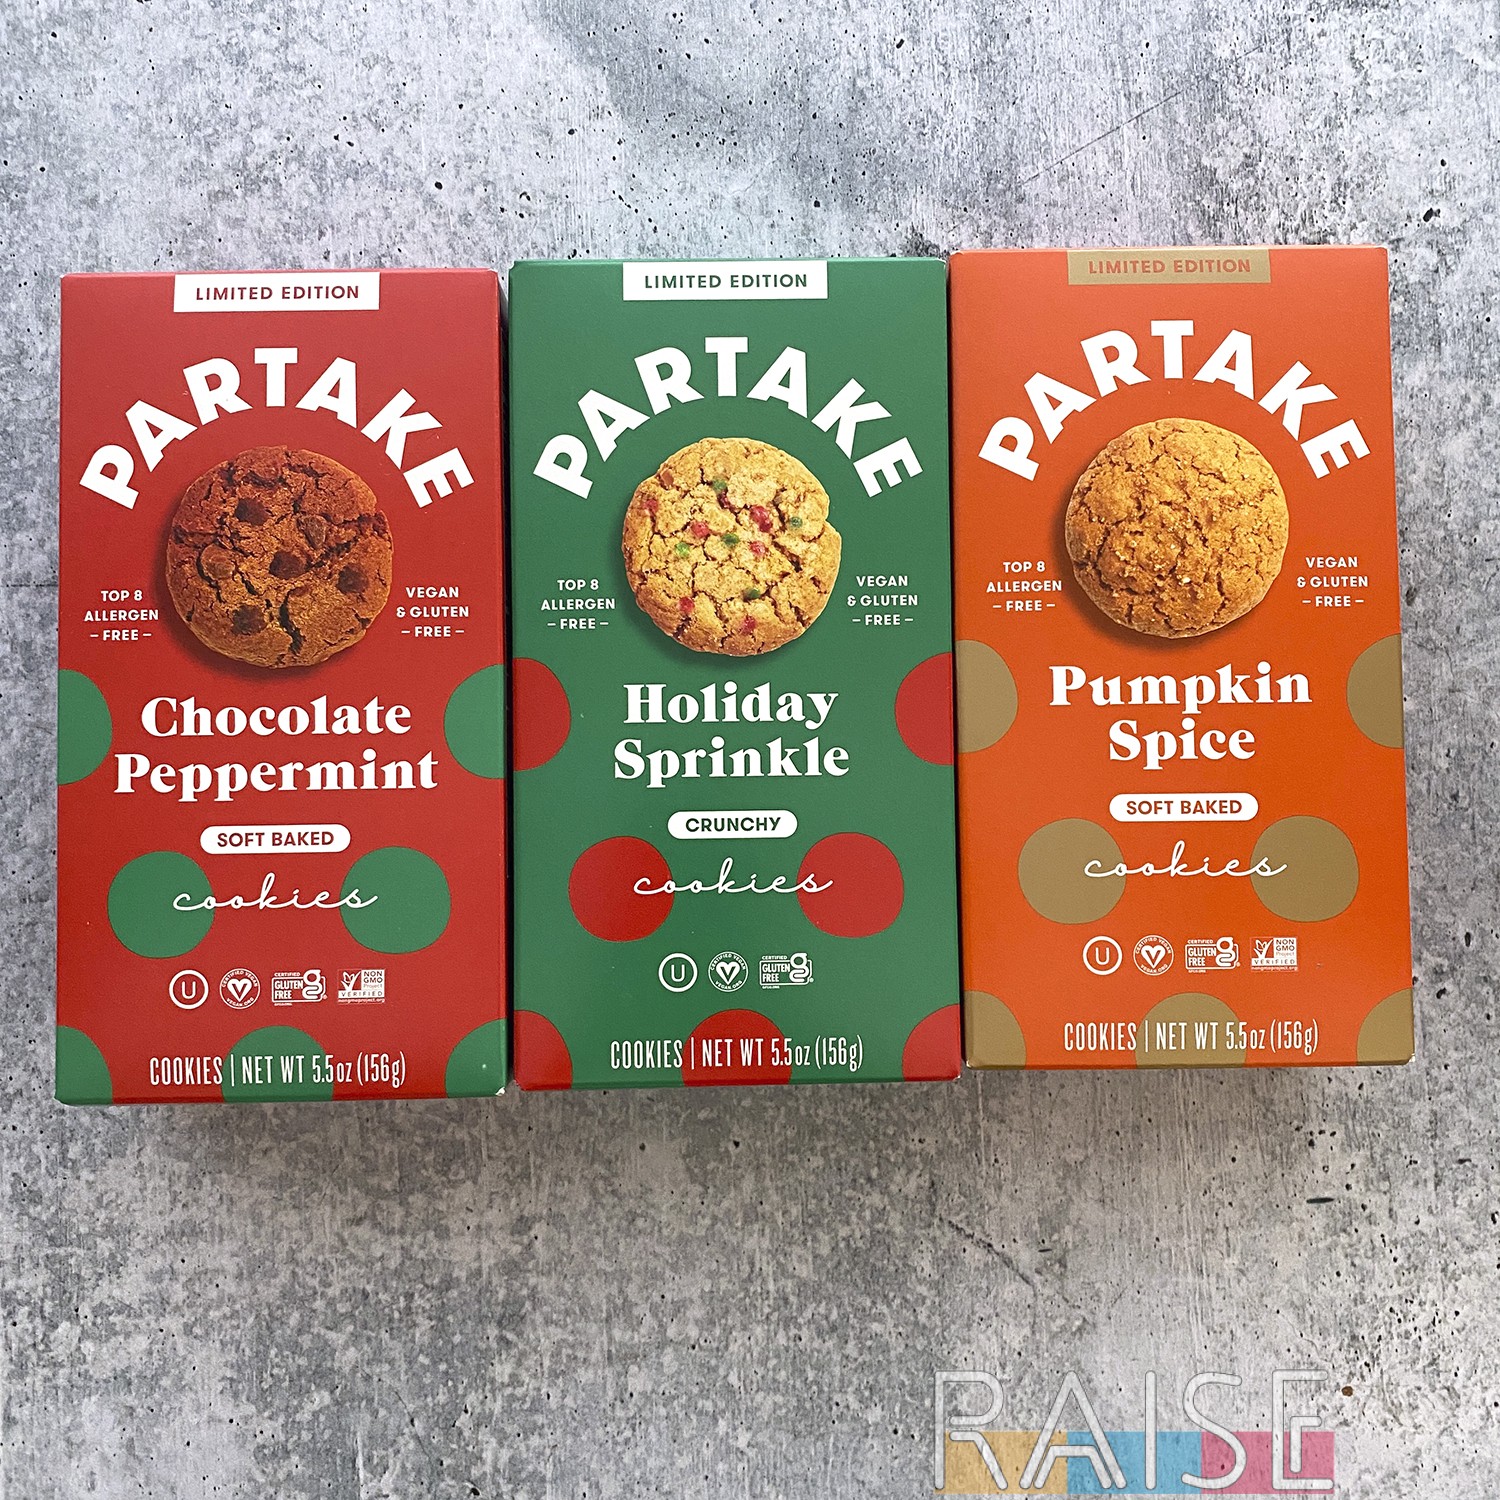 Partake Cookies: Birthday Cake, Butter Cookie & Chocolate Chip Review 